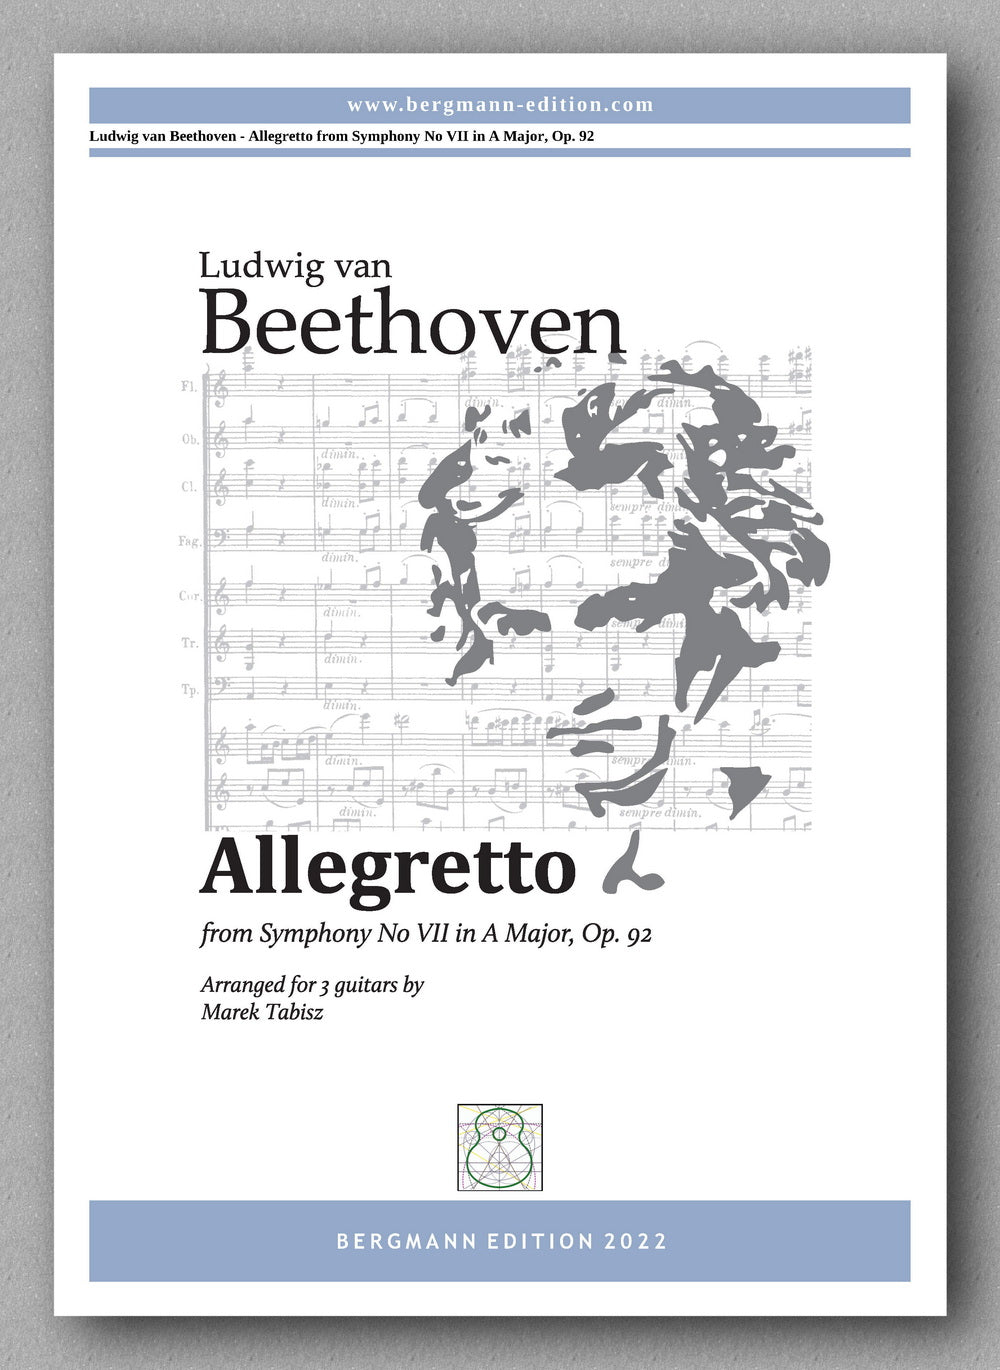 Beethoven-Tabisz, Allegretto from Symphony No. VII - cover